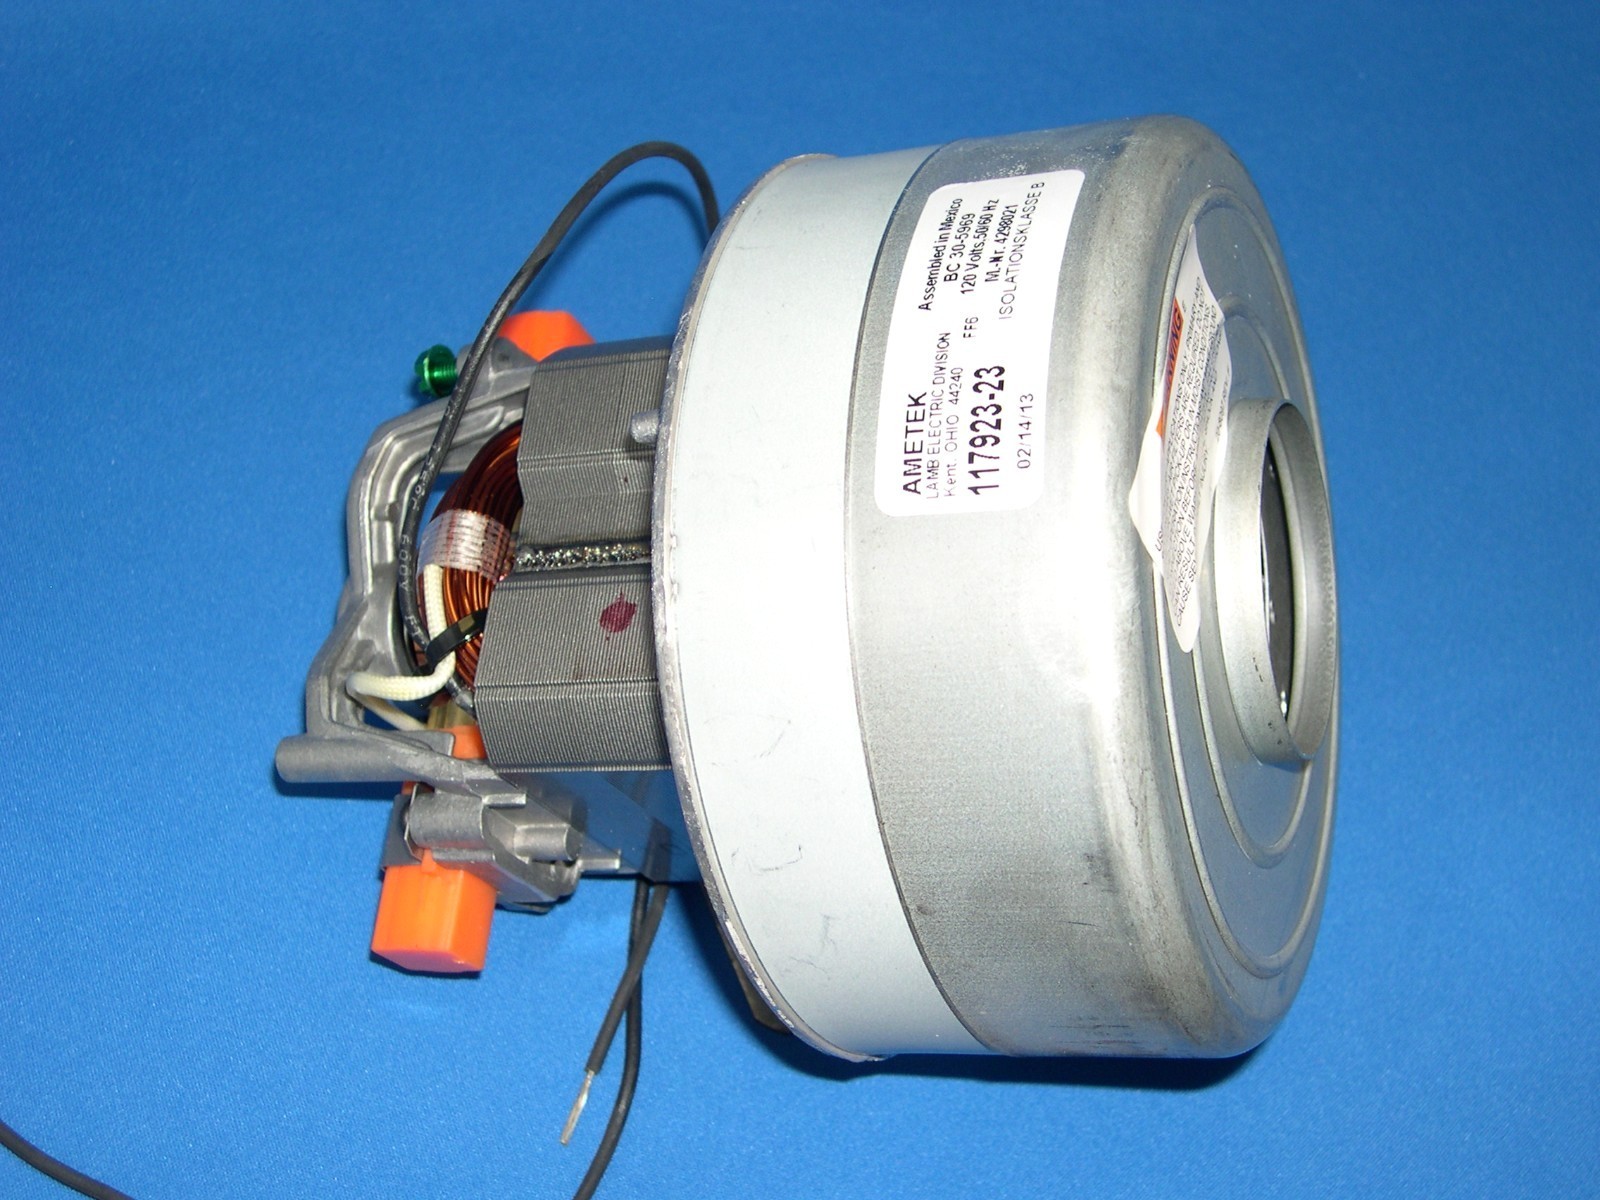 Featured image for “New Genuine Miele Canister Vacuum Cleaner Motor 117923-23, 117923 or 7923-23”